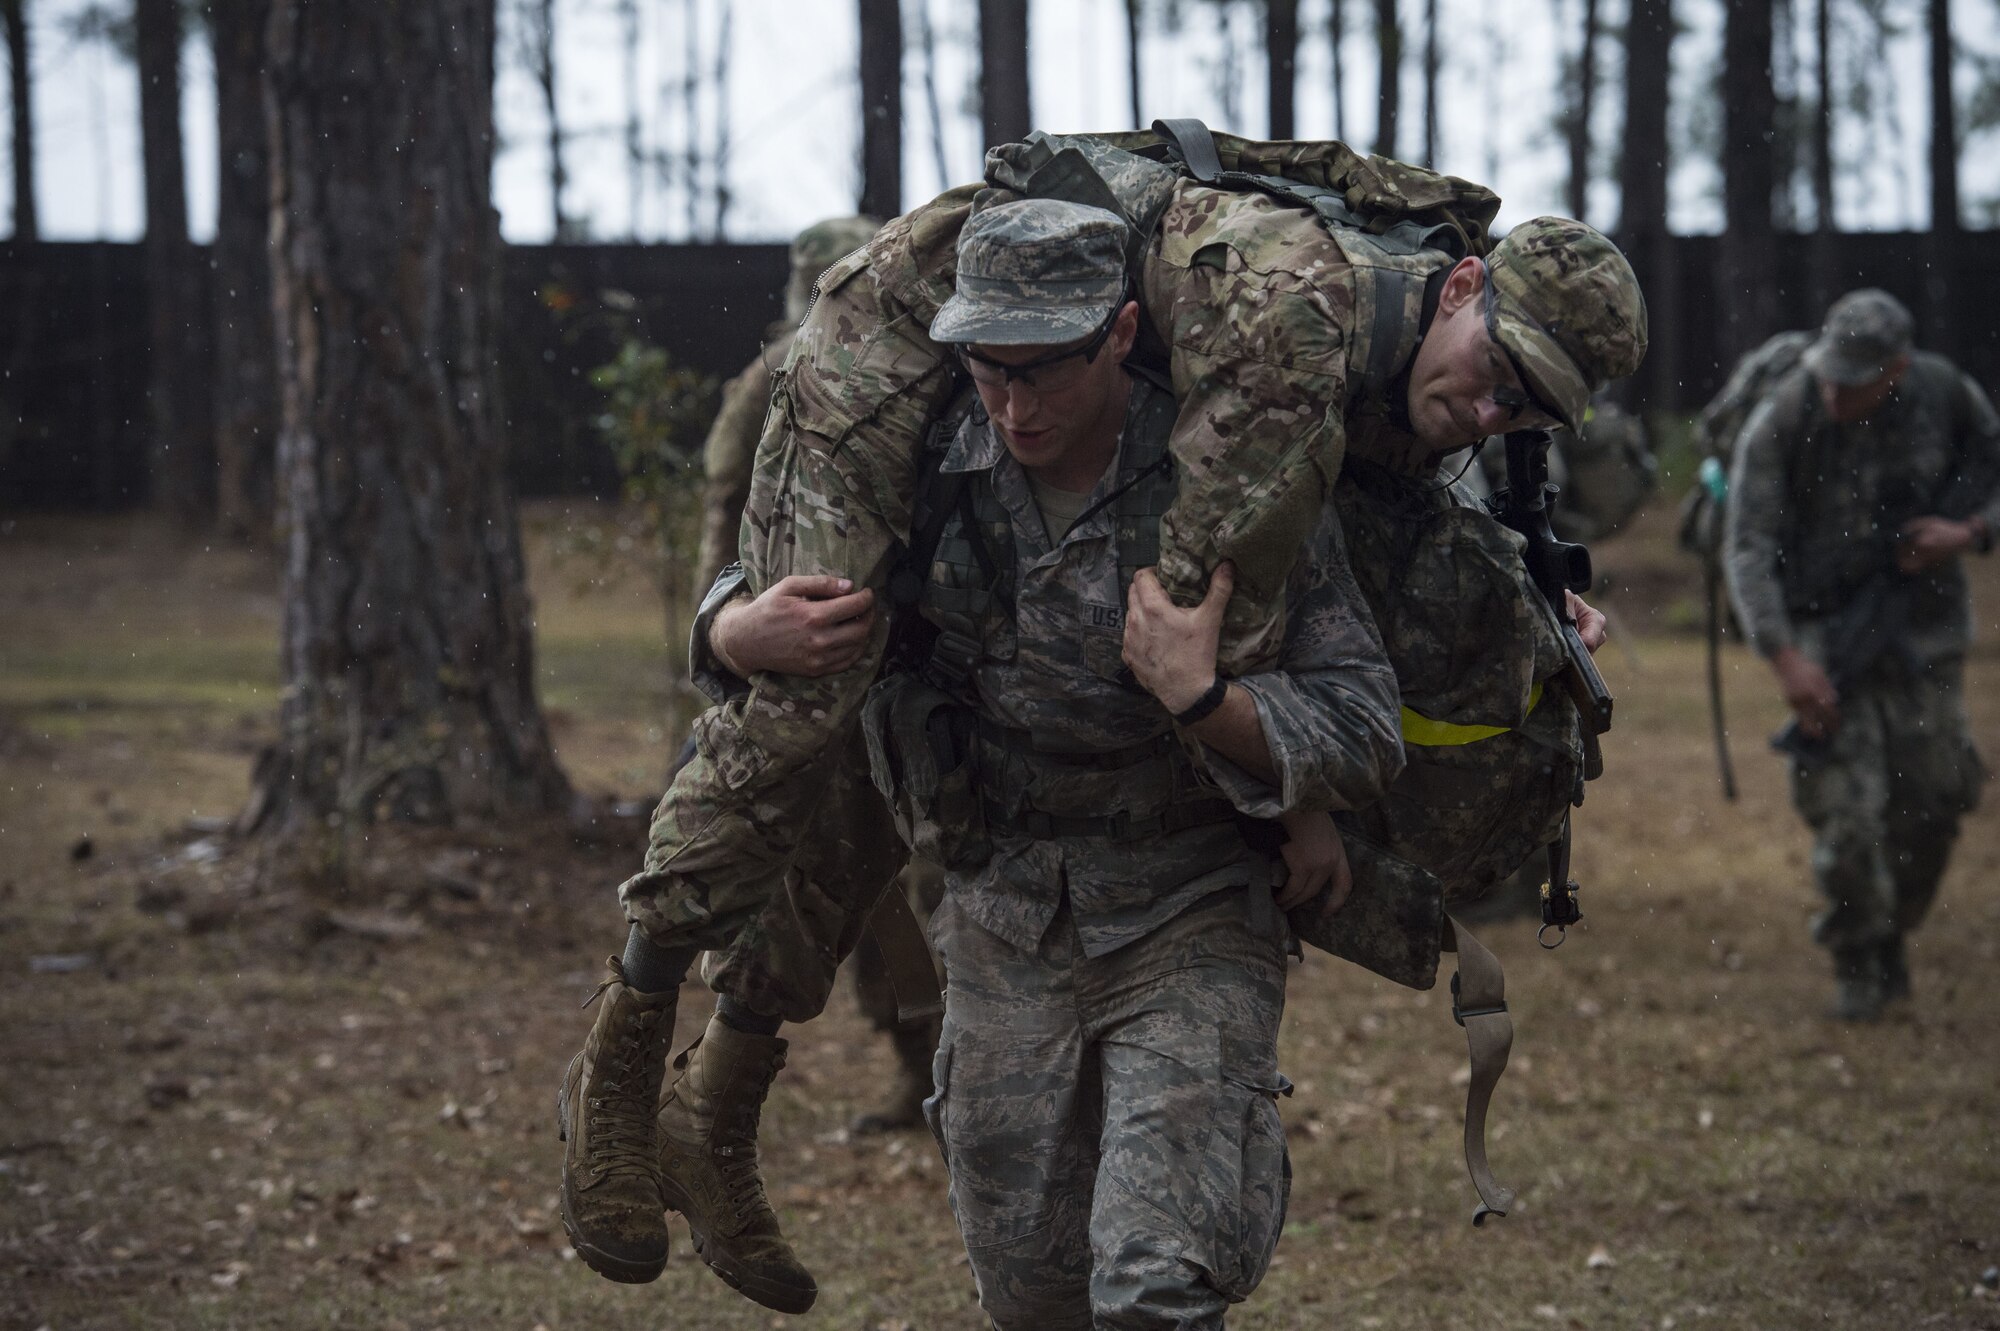 An Airman carries a simulated casualty during a Pre Ranger Assessment Course, Feb. 11, 2018, at Moody Air Force Base, Ga. The three-day assessment is designed to determine whether Airmen are ready to attend the Air Force Ranger Assessment Course held at Fort Bliss Army Post, Texas. Ranger cadre test Airmen’s physical fitness, tactical abilities, land navigation skills, leadership qualities, water confidence and academic ability to determine if they have the knowledge and will to become Rangers. (U.S. Air Force photo by Senior Airman Janiqua P. Robinson)